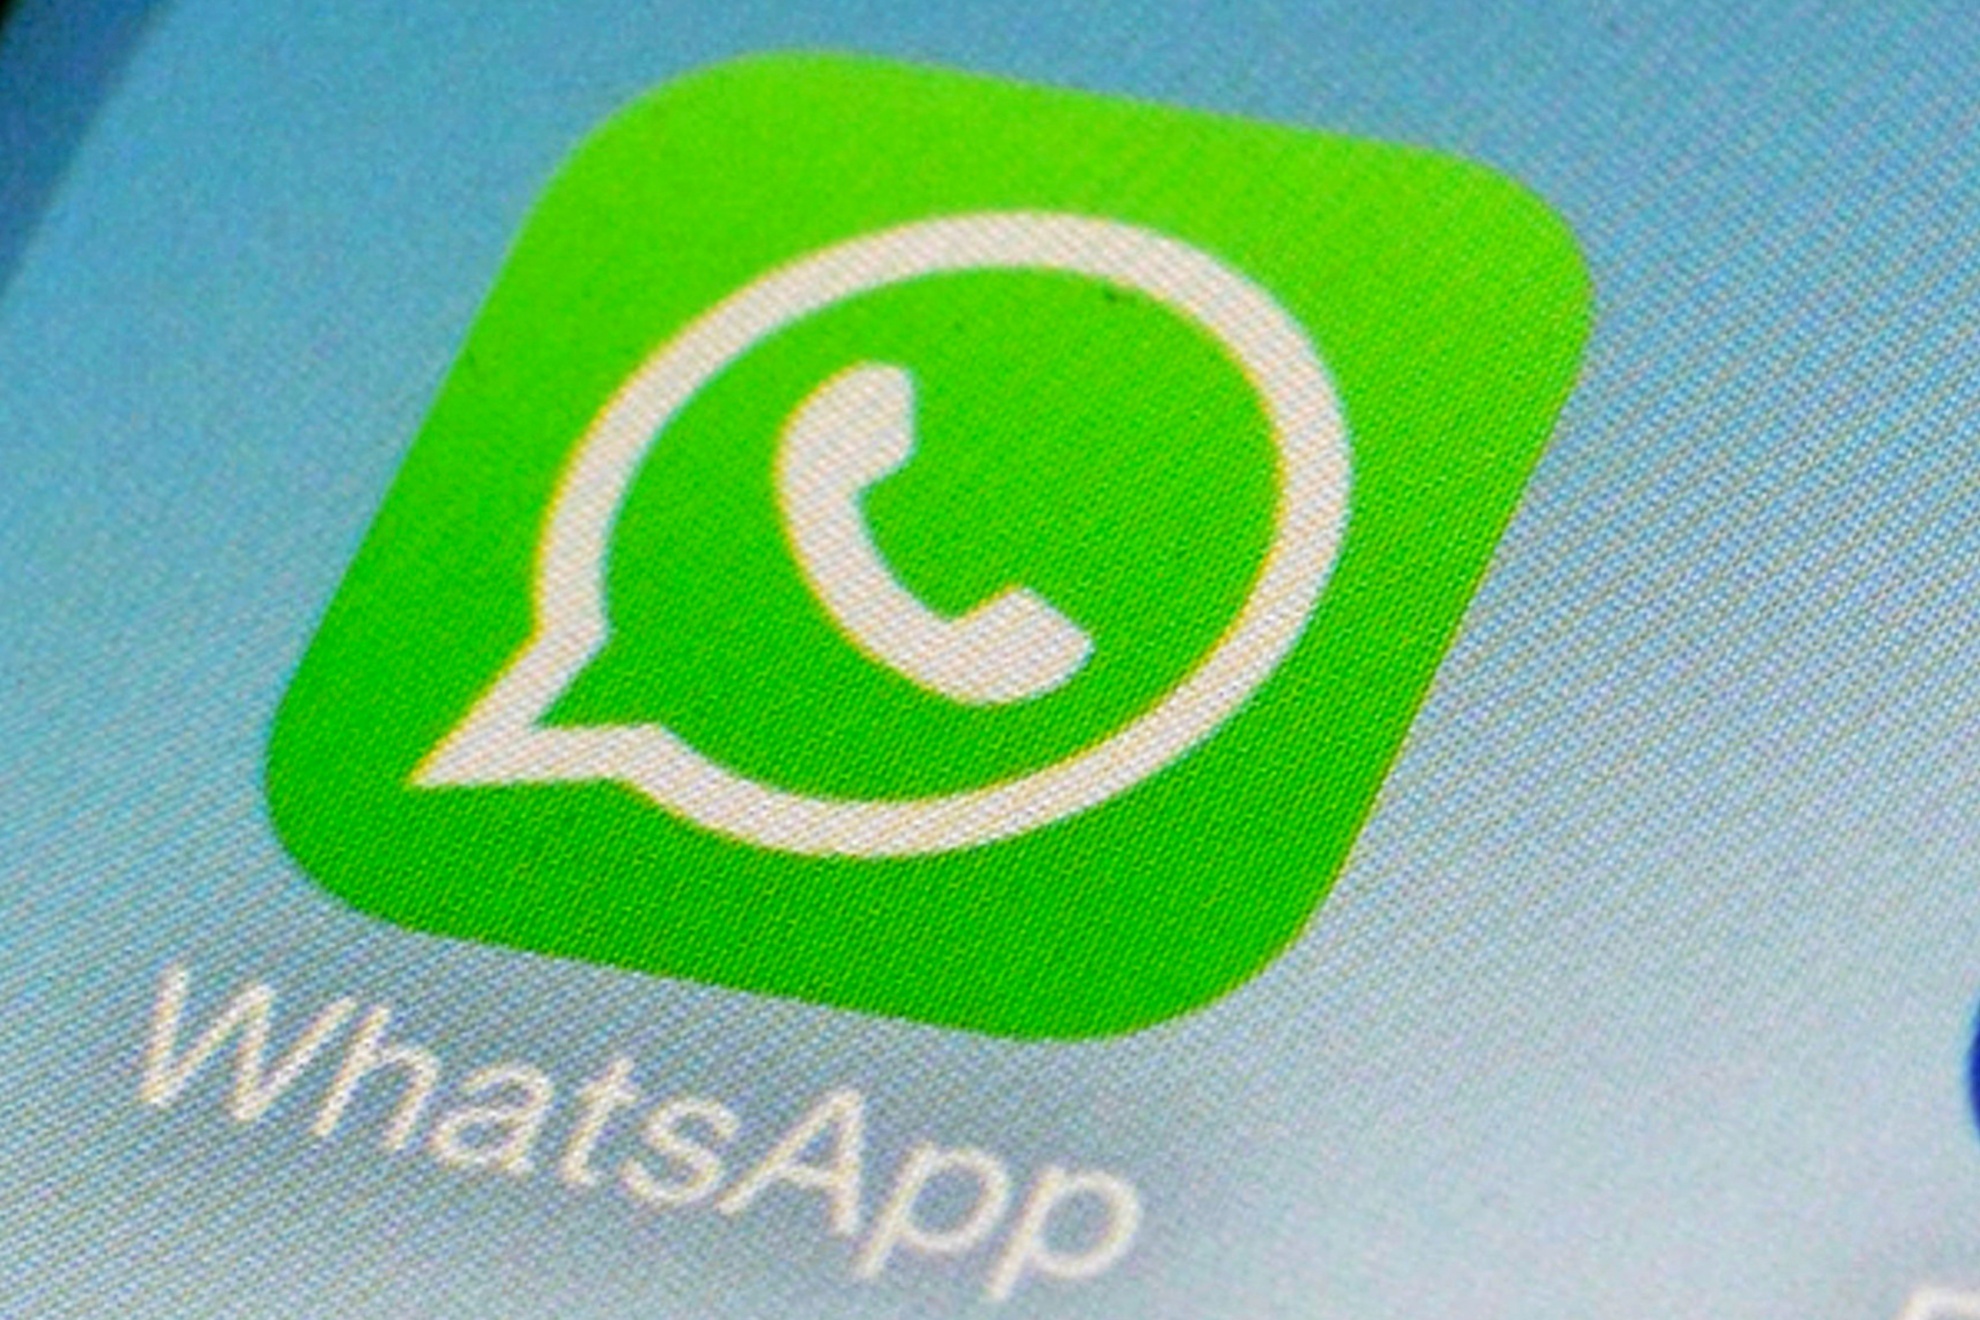 The worldwide popular messaging app had an outage.